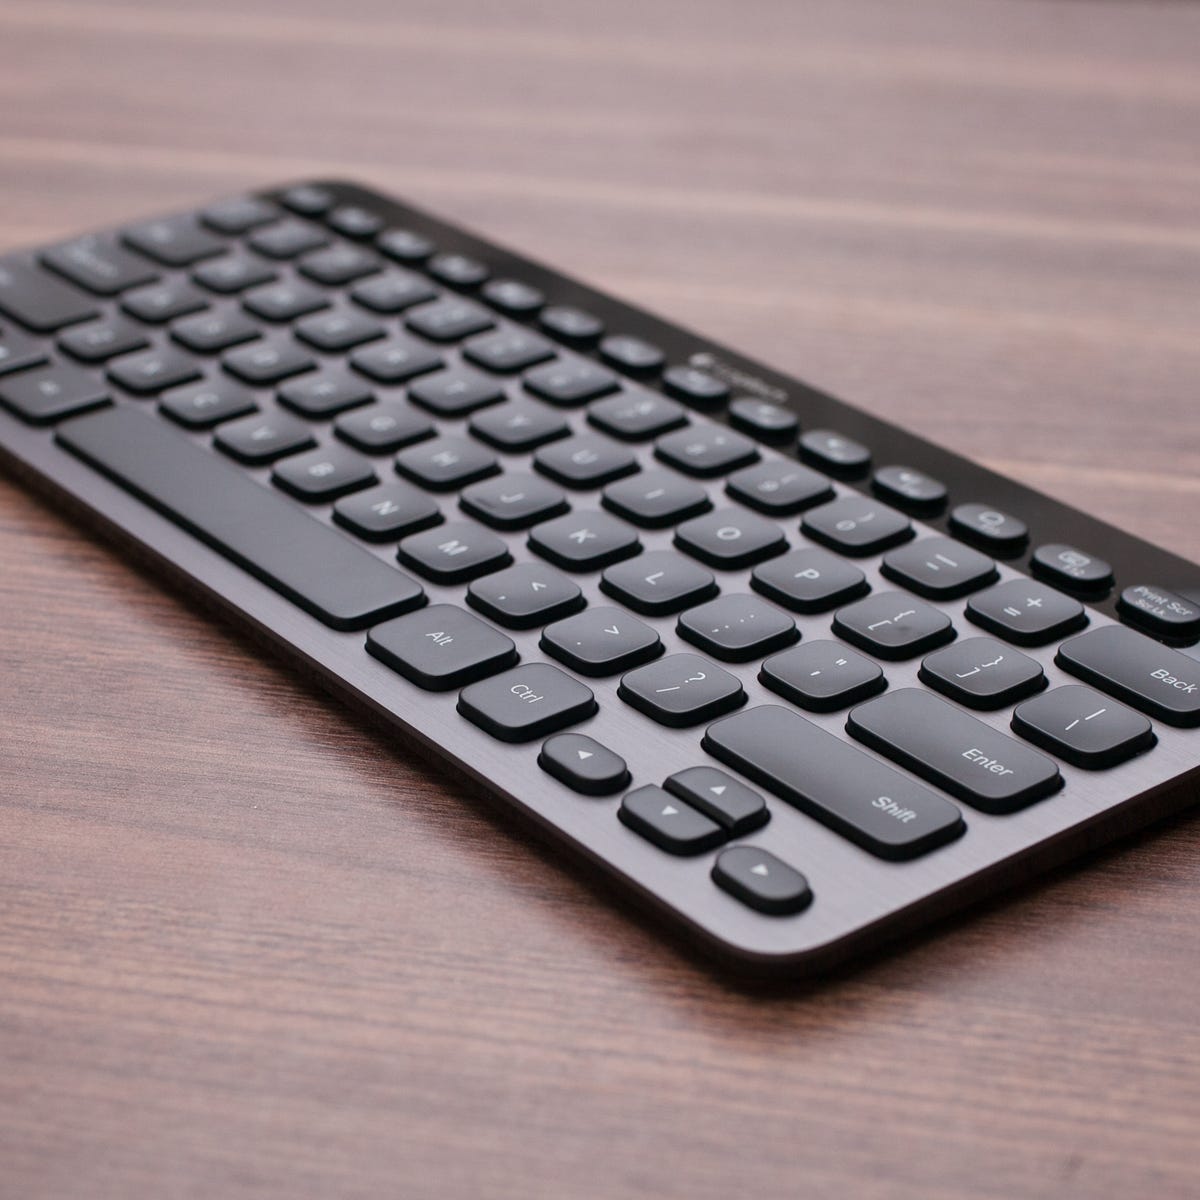 Leven van Mentor Bisschop Logitech Bluetooth Illuminated Keyboard K810 review: Typing luxury for  multidevice households - CNET